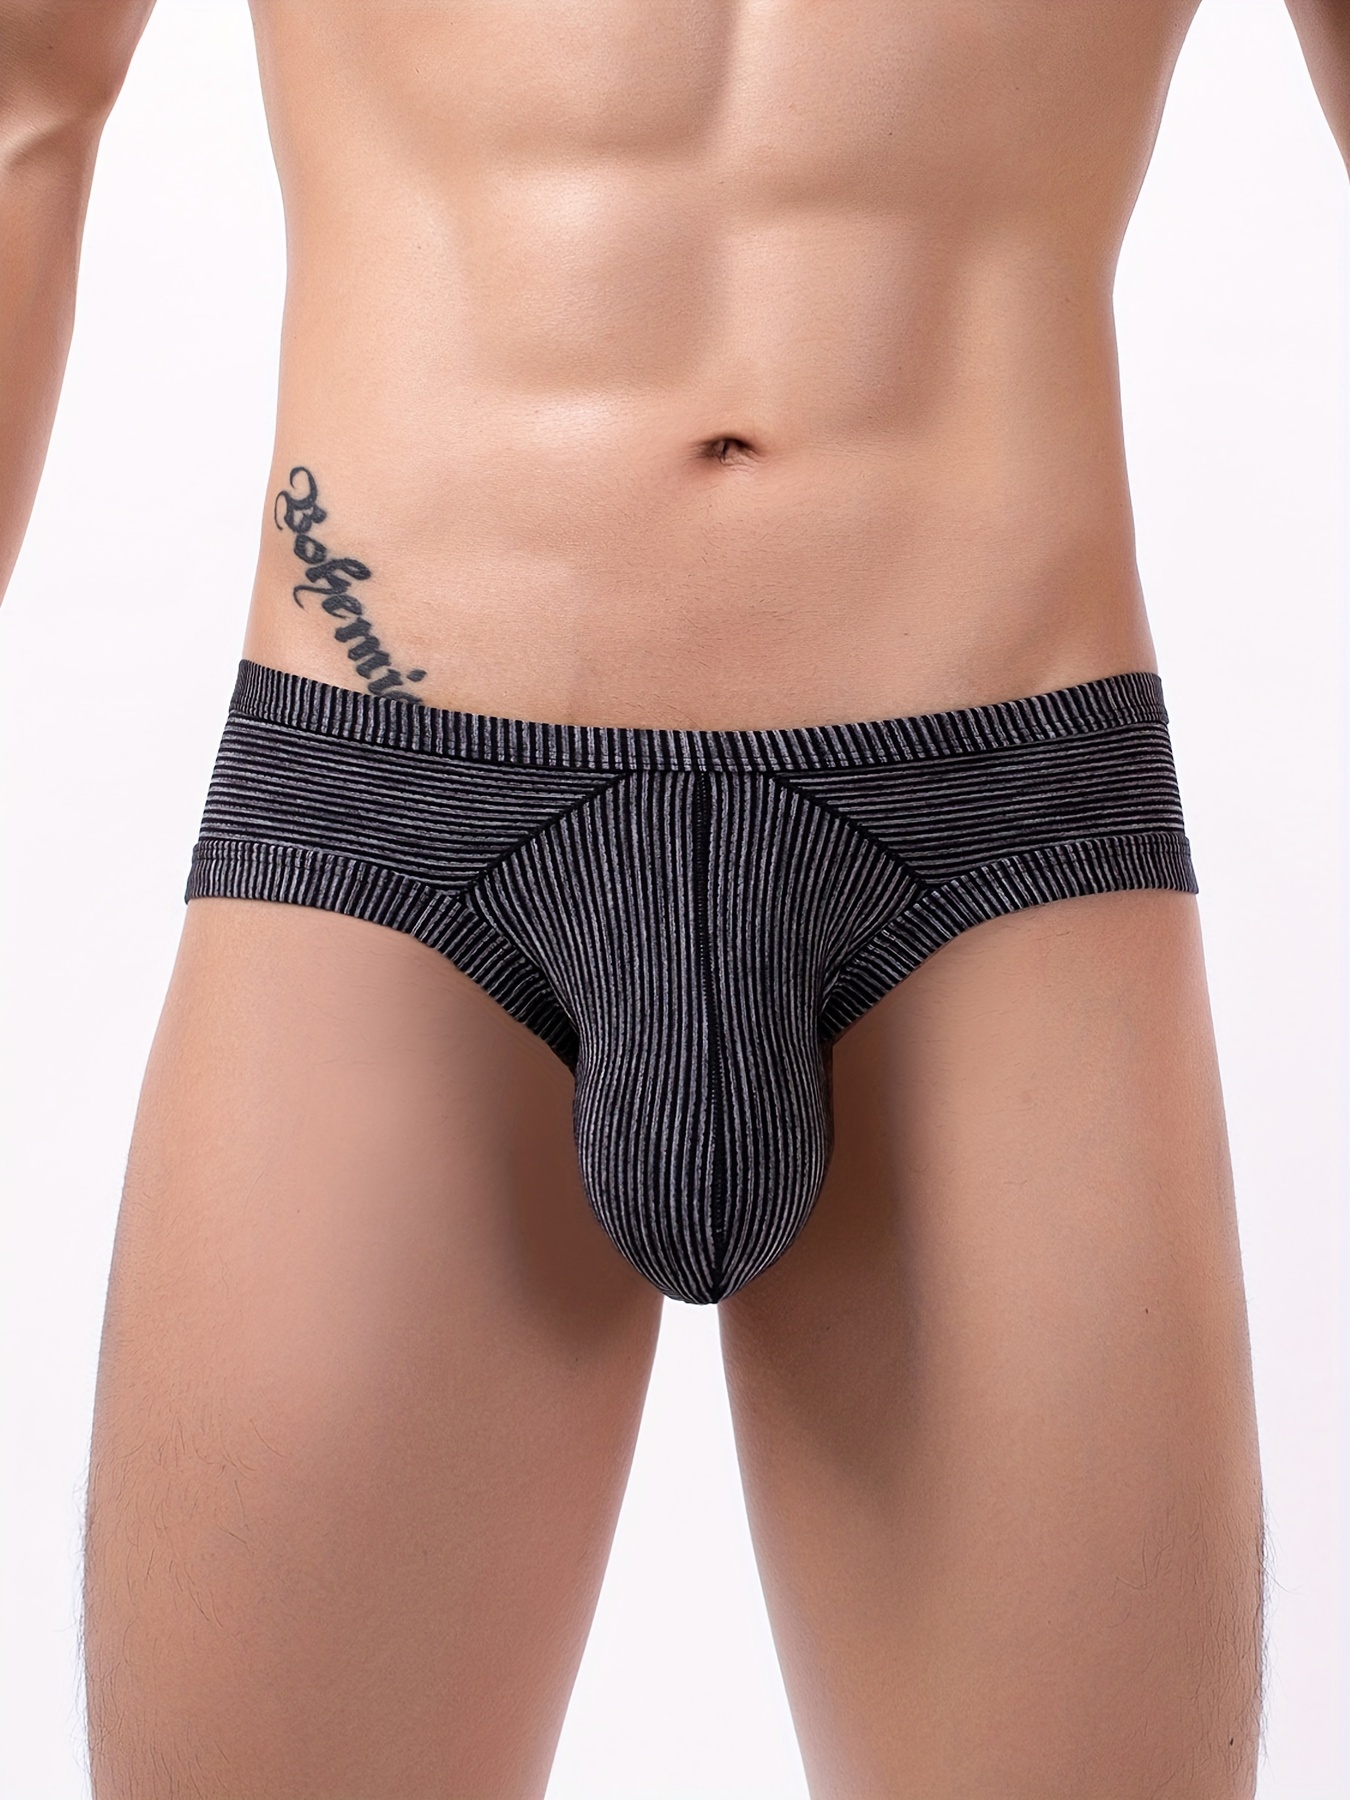 Men's Jockstraps, Underwear For Men, Sexy Mesh Striped Hollow Out Thong  Breathable Comfortable Athletic Supporter, Men's Thong Underwear Bikini